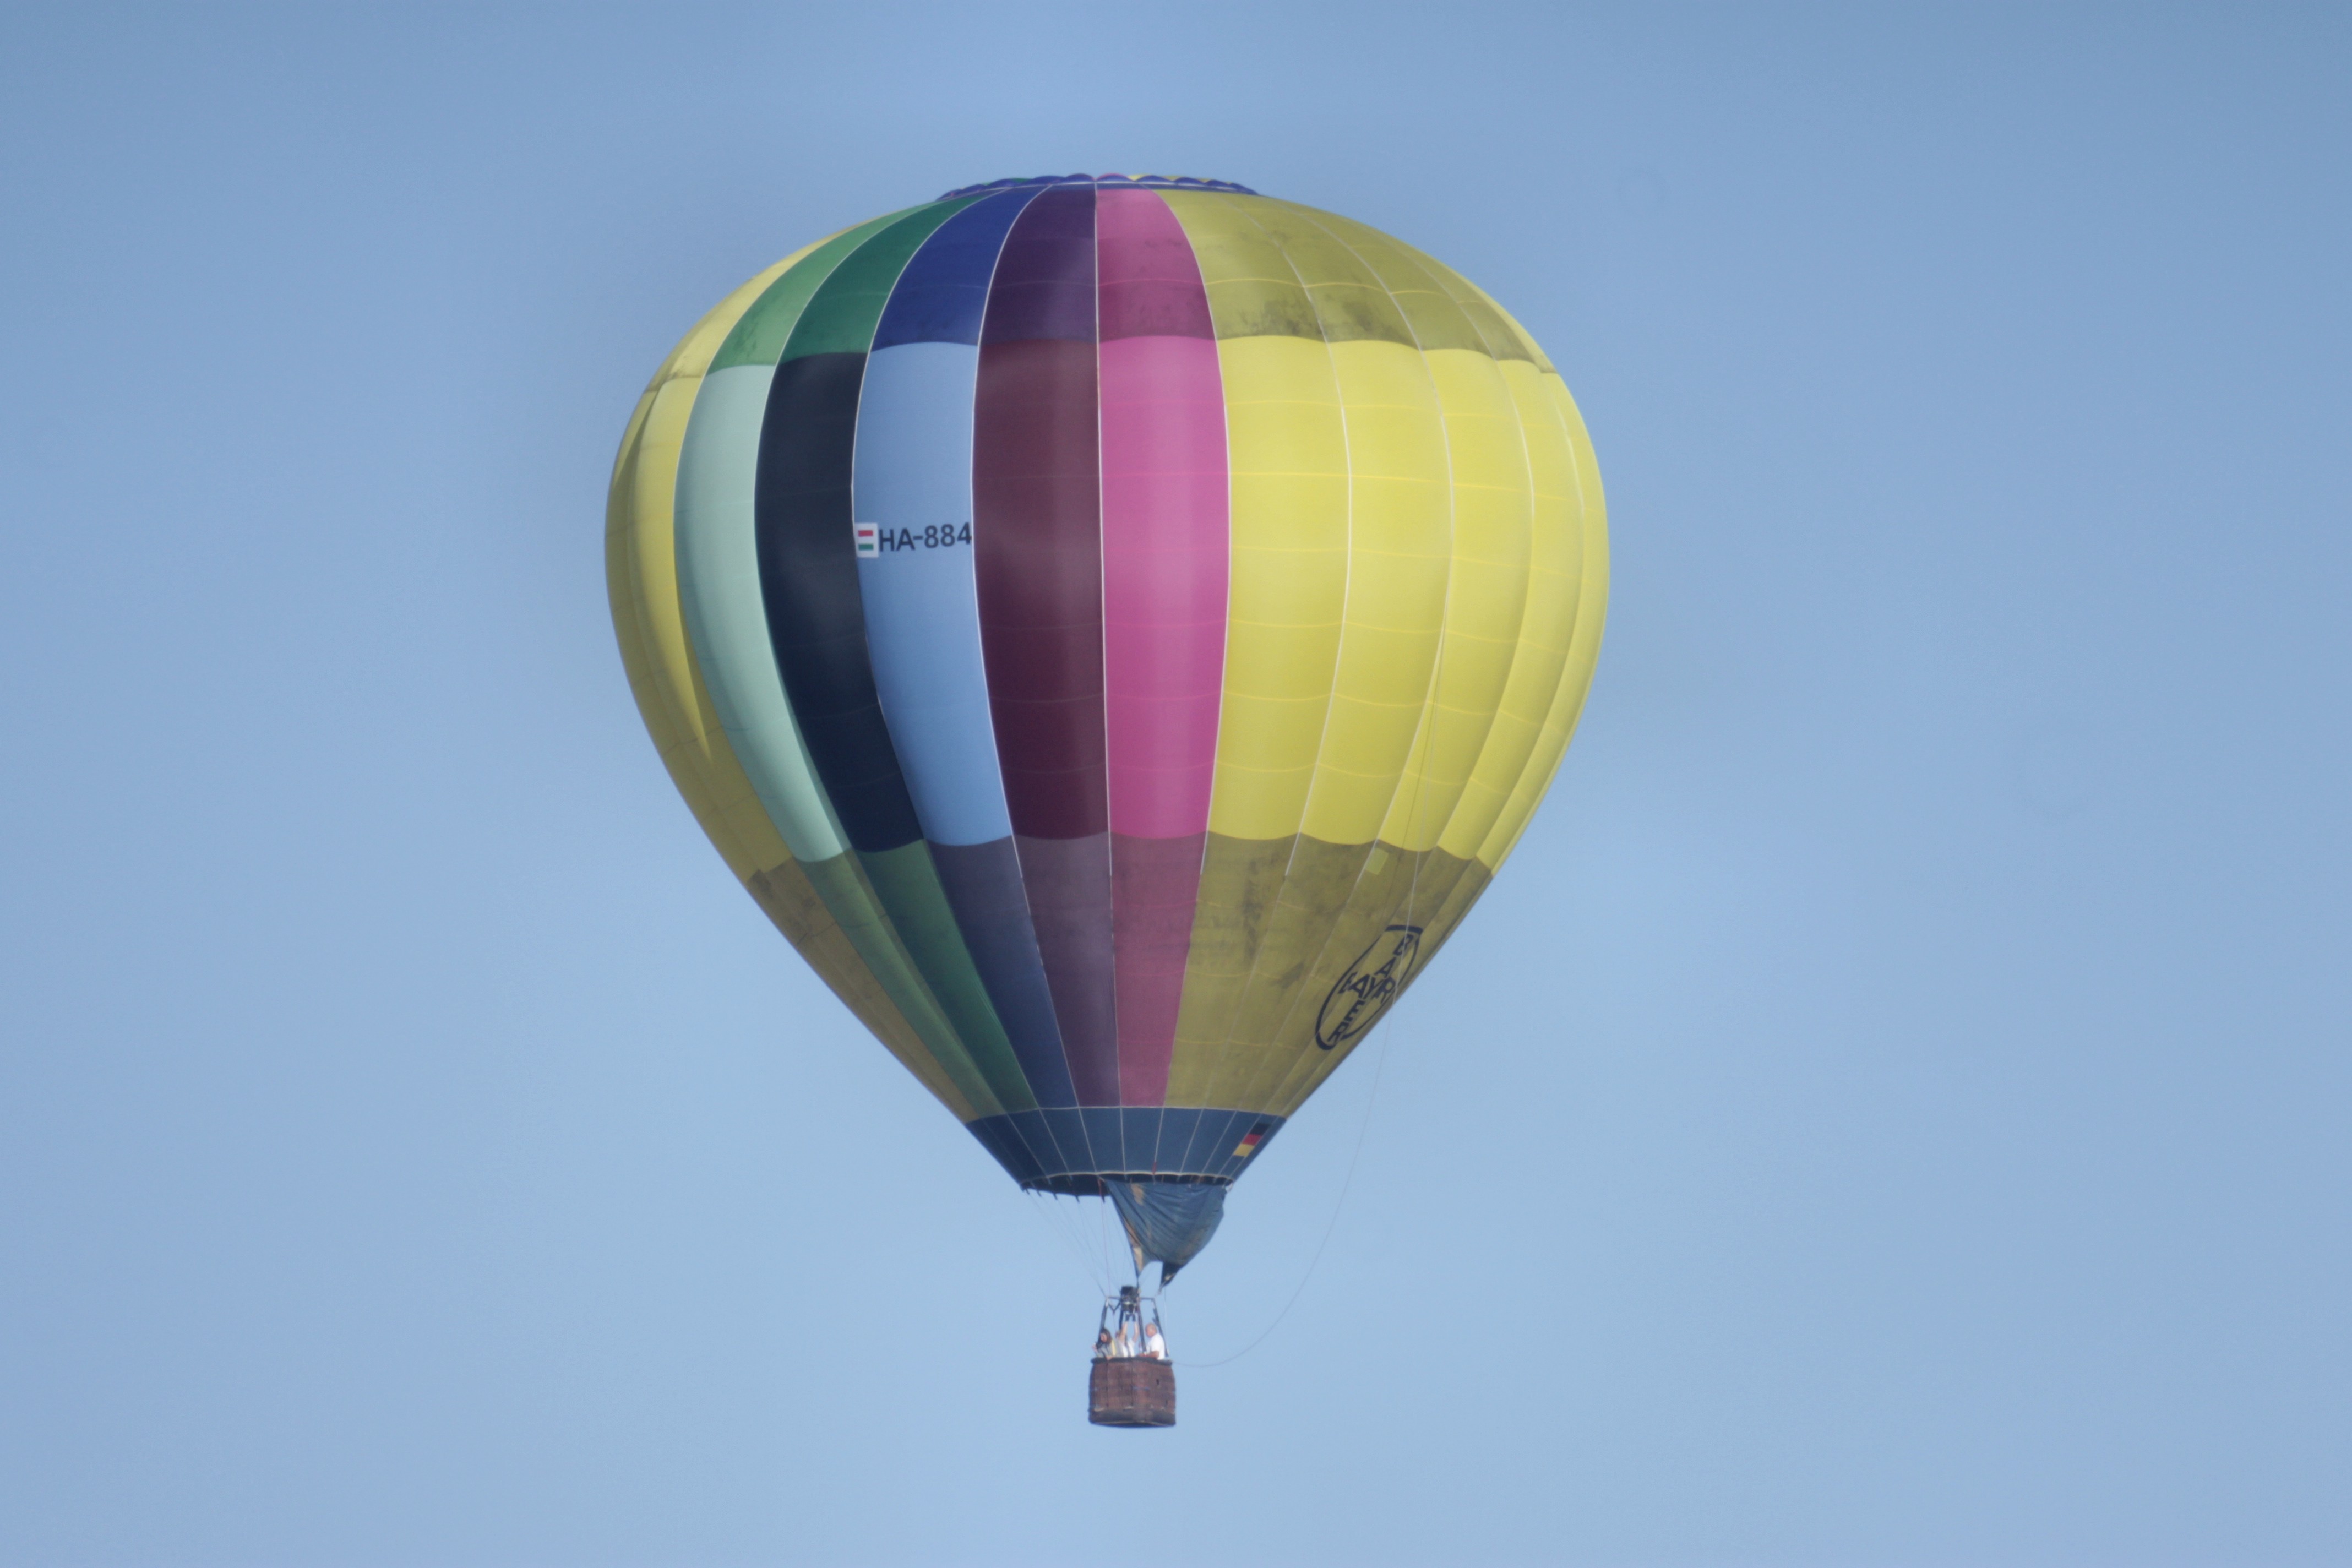 General 4272x2848 hot air balloons outdoors numbers vehicle